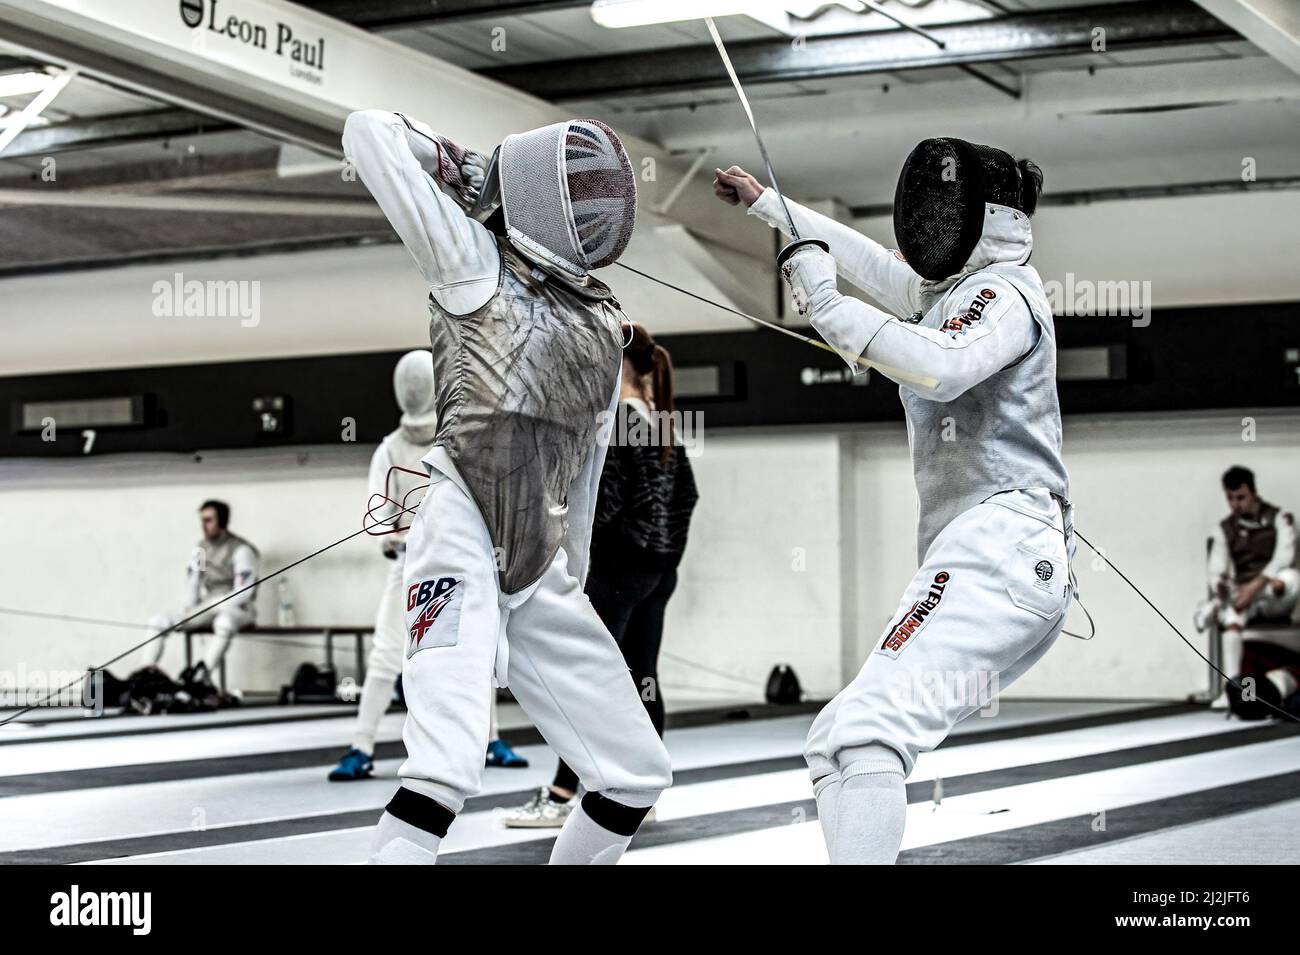 Fencing Foil Action Stock Photo